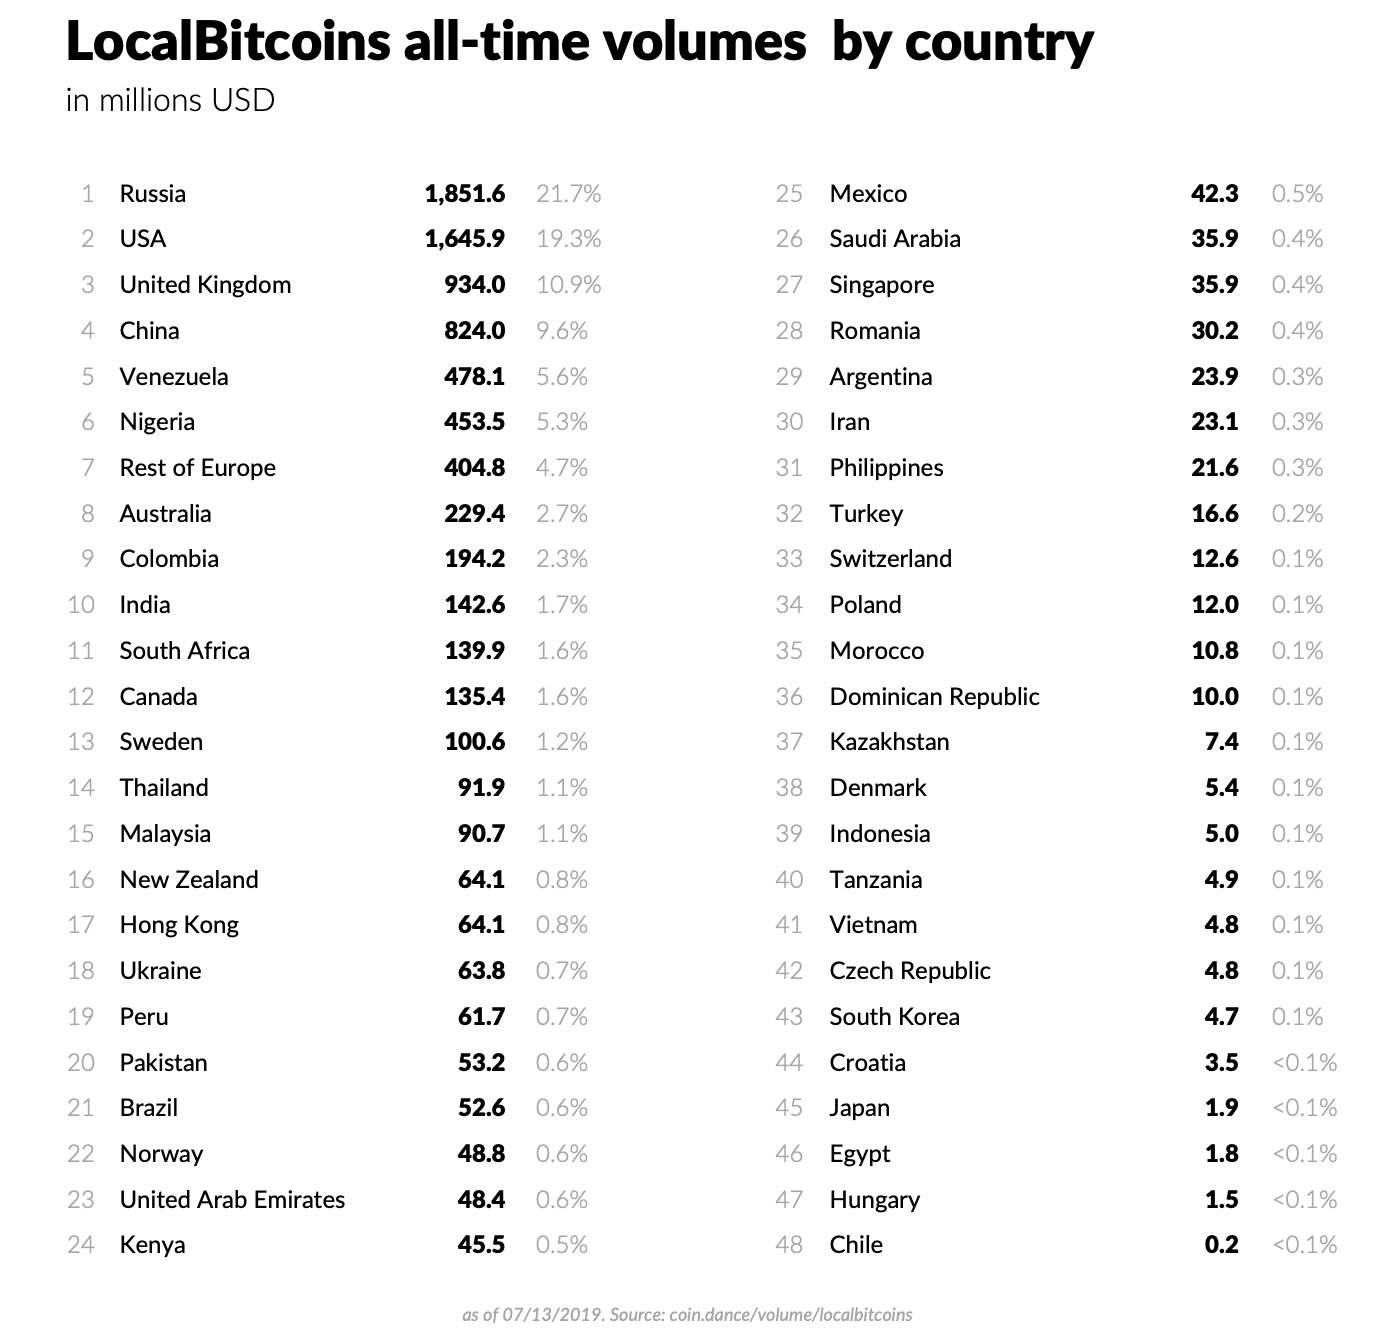 localbitcoins all-time volumes by country